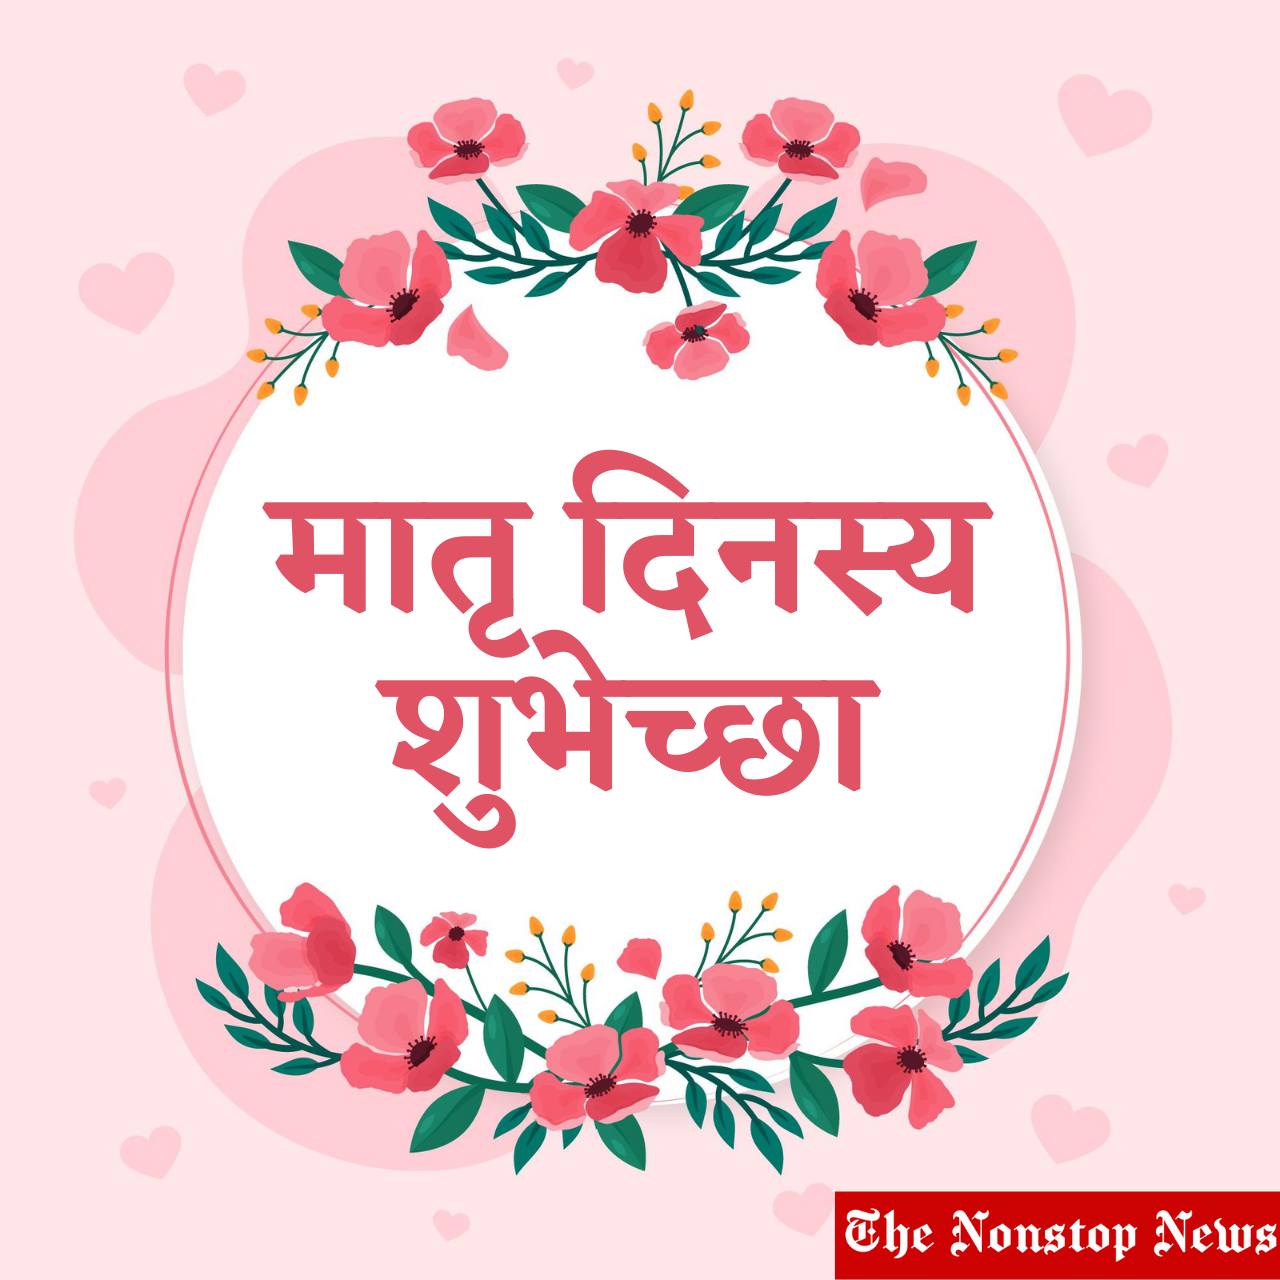 Mother's Day 2021 Wishes in Gujarati and Sanskrit, Images (Photos), Greetings, Messages, and Quotes to share with Mom